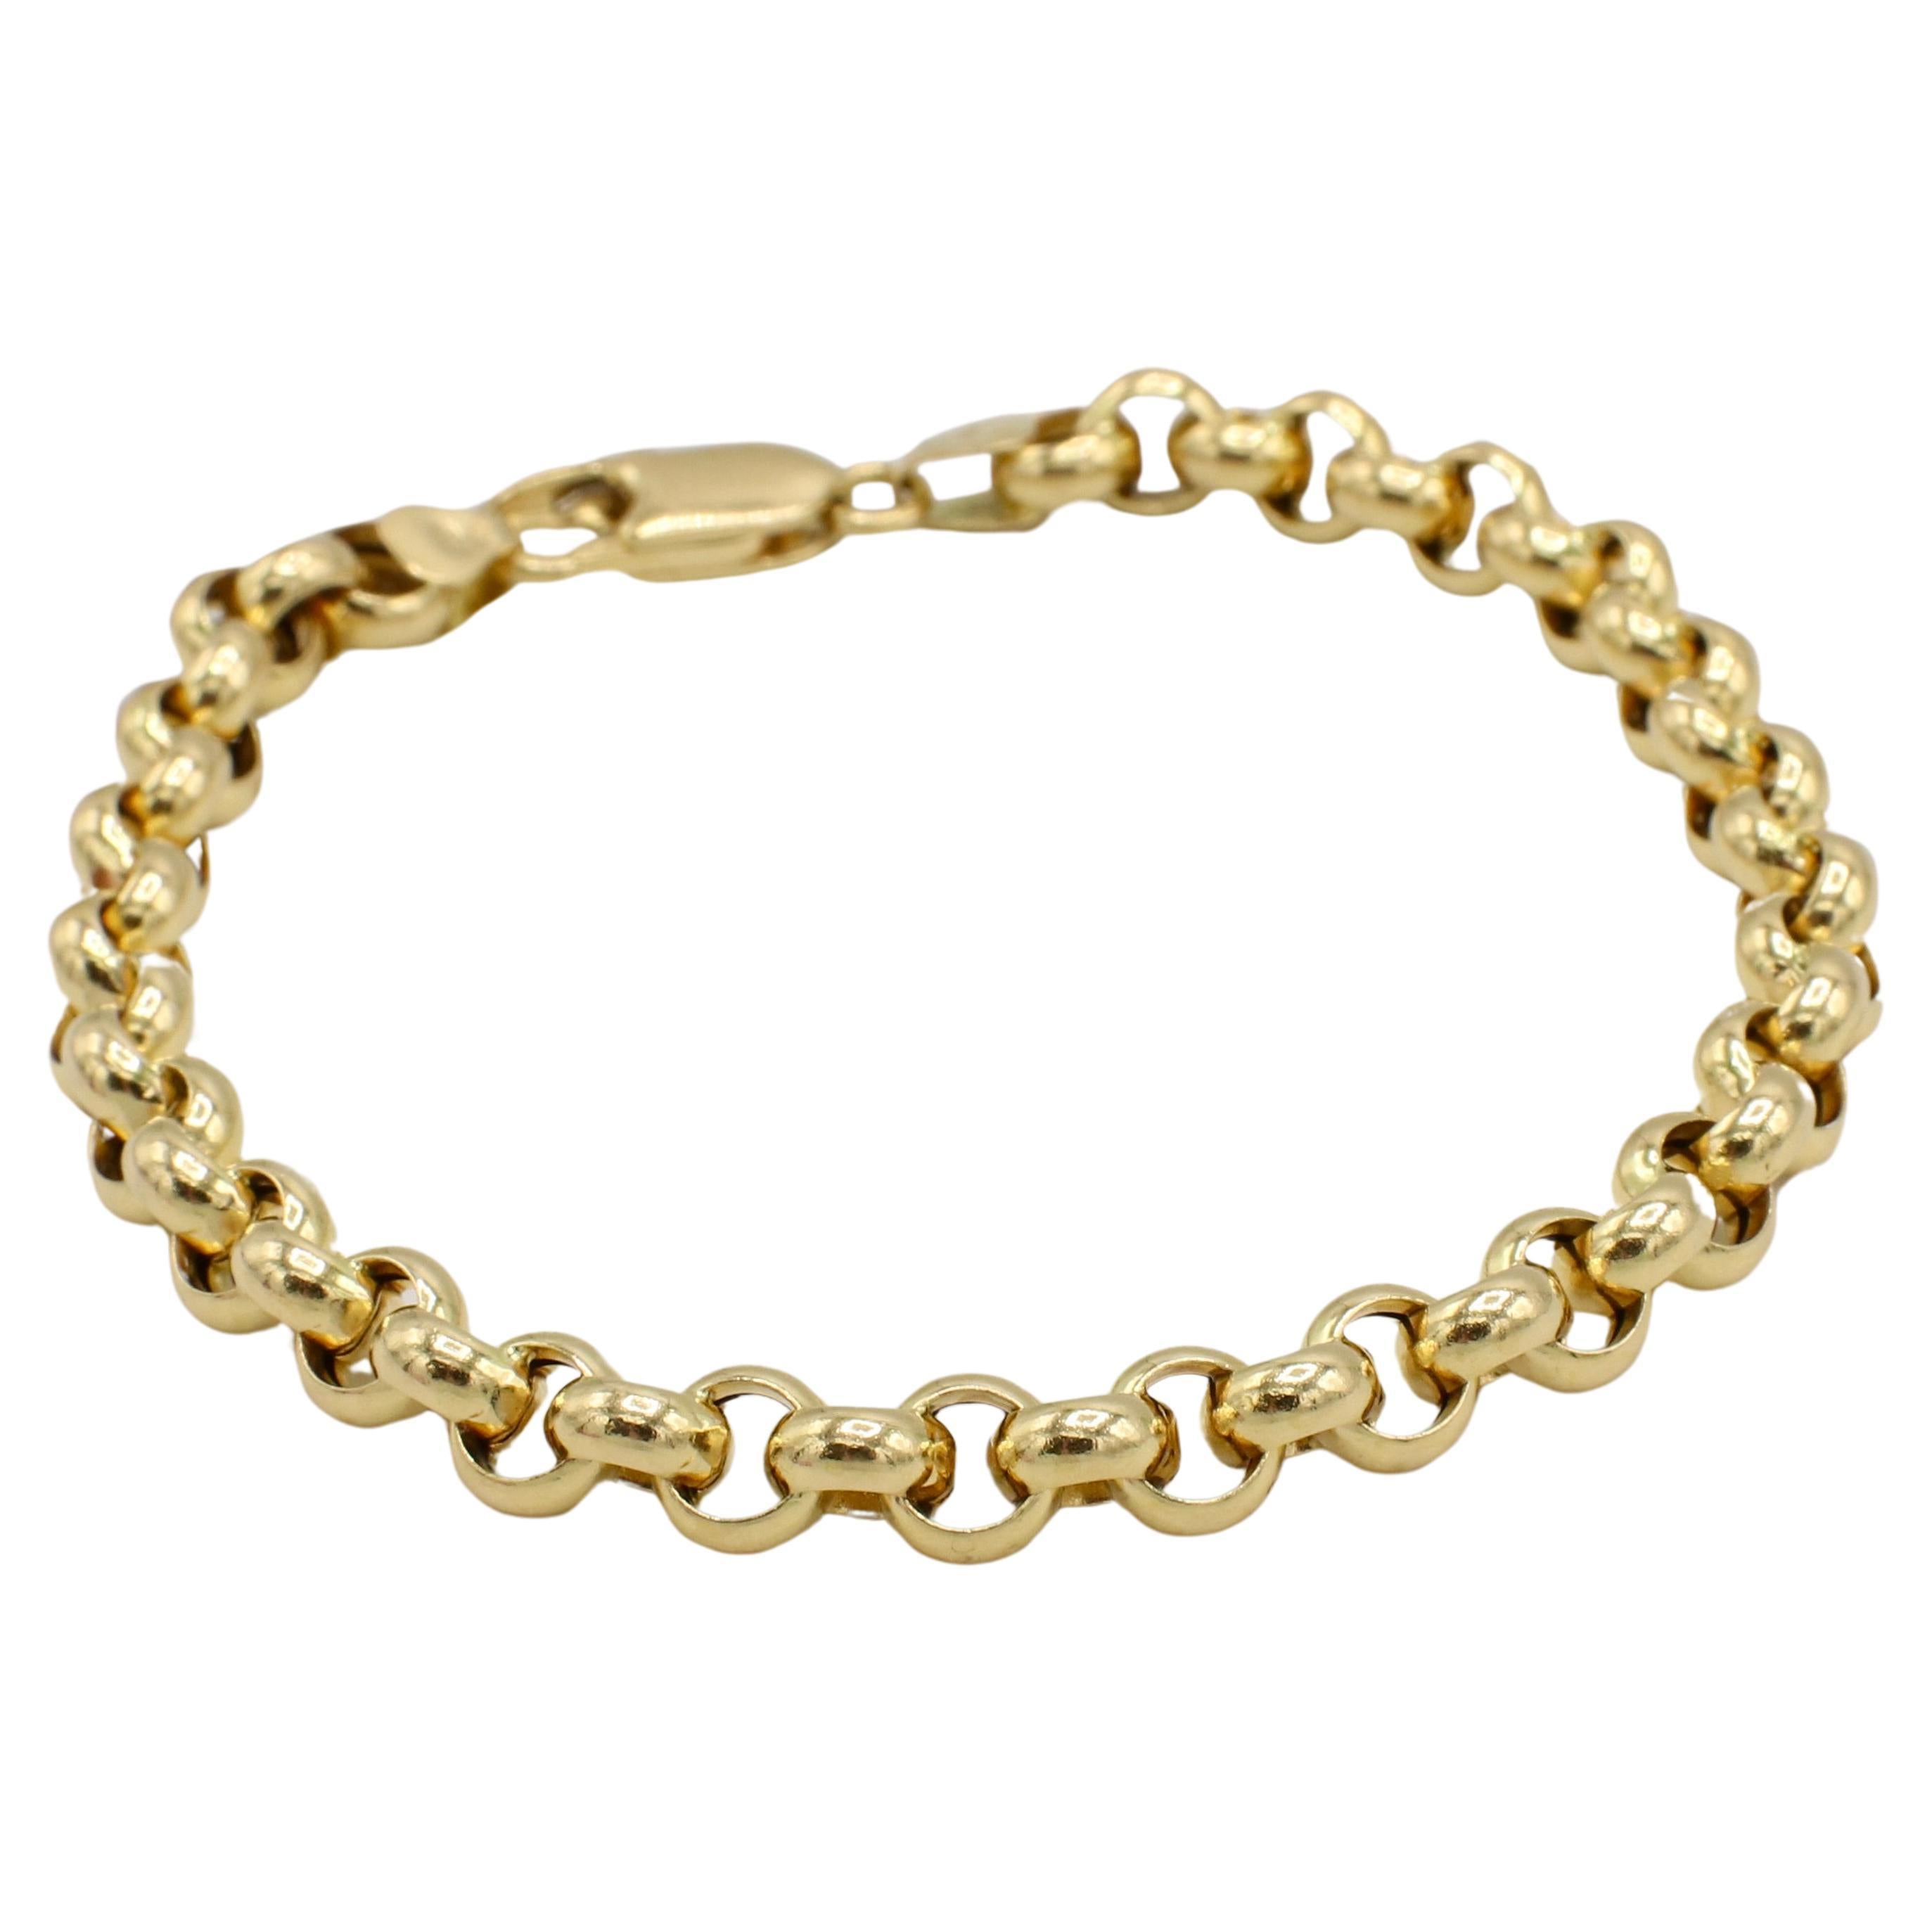 19 Karat Yellow Gold Rolo Link Chain Bracelet 
Metal: 14k yellow gold
Weight: 11.78 grams
Width: 6.5mm
Length: 7.5 inches
Signed: European hallmarks, 800

